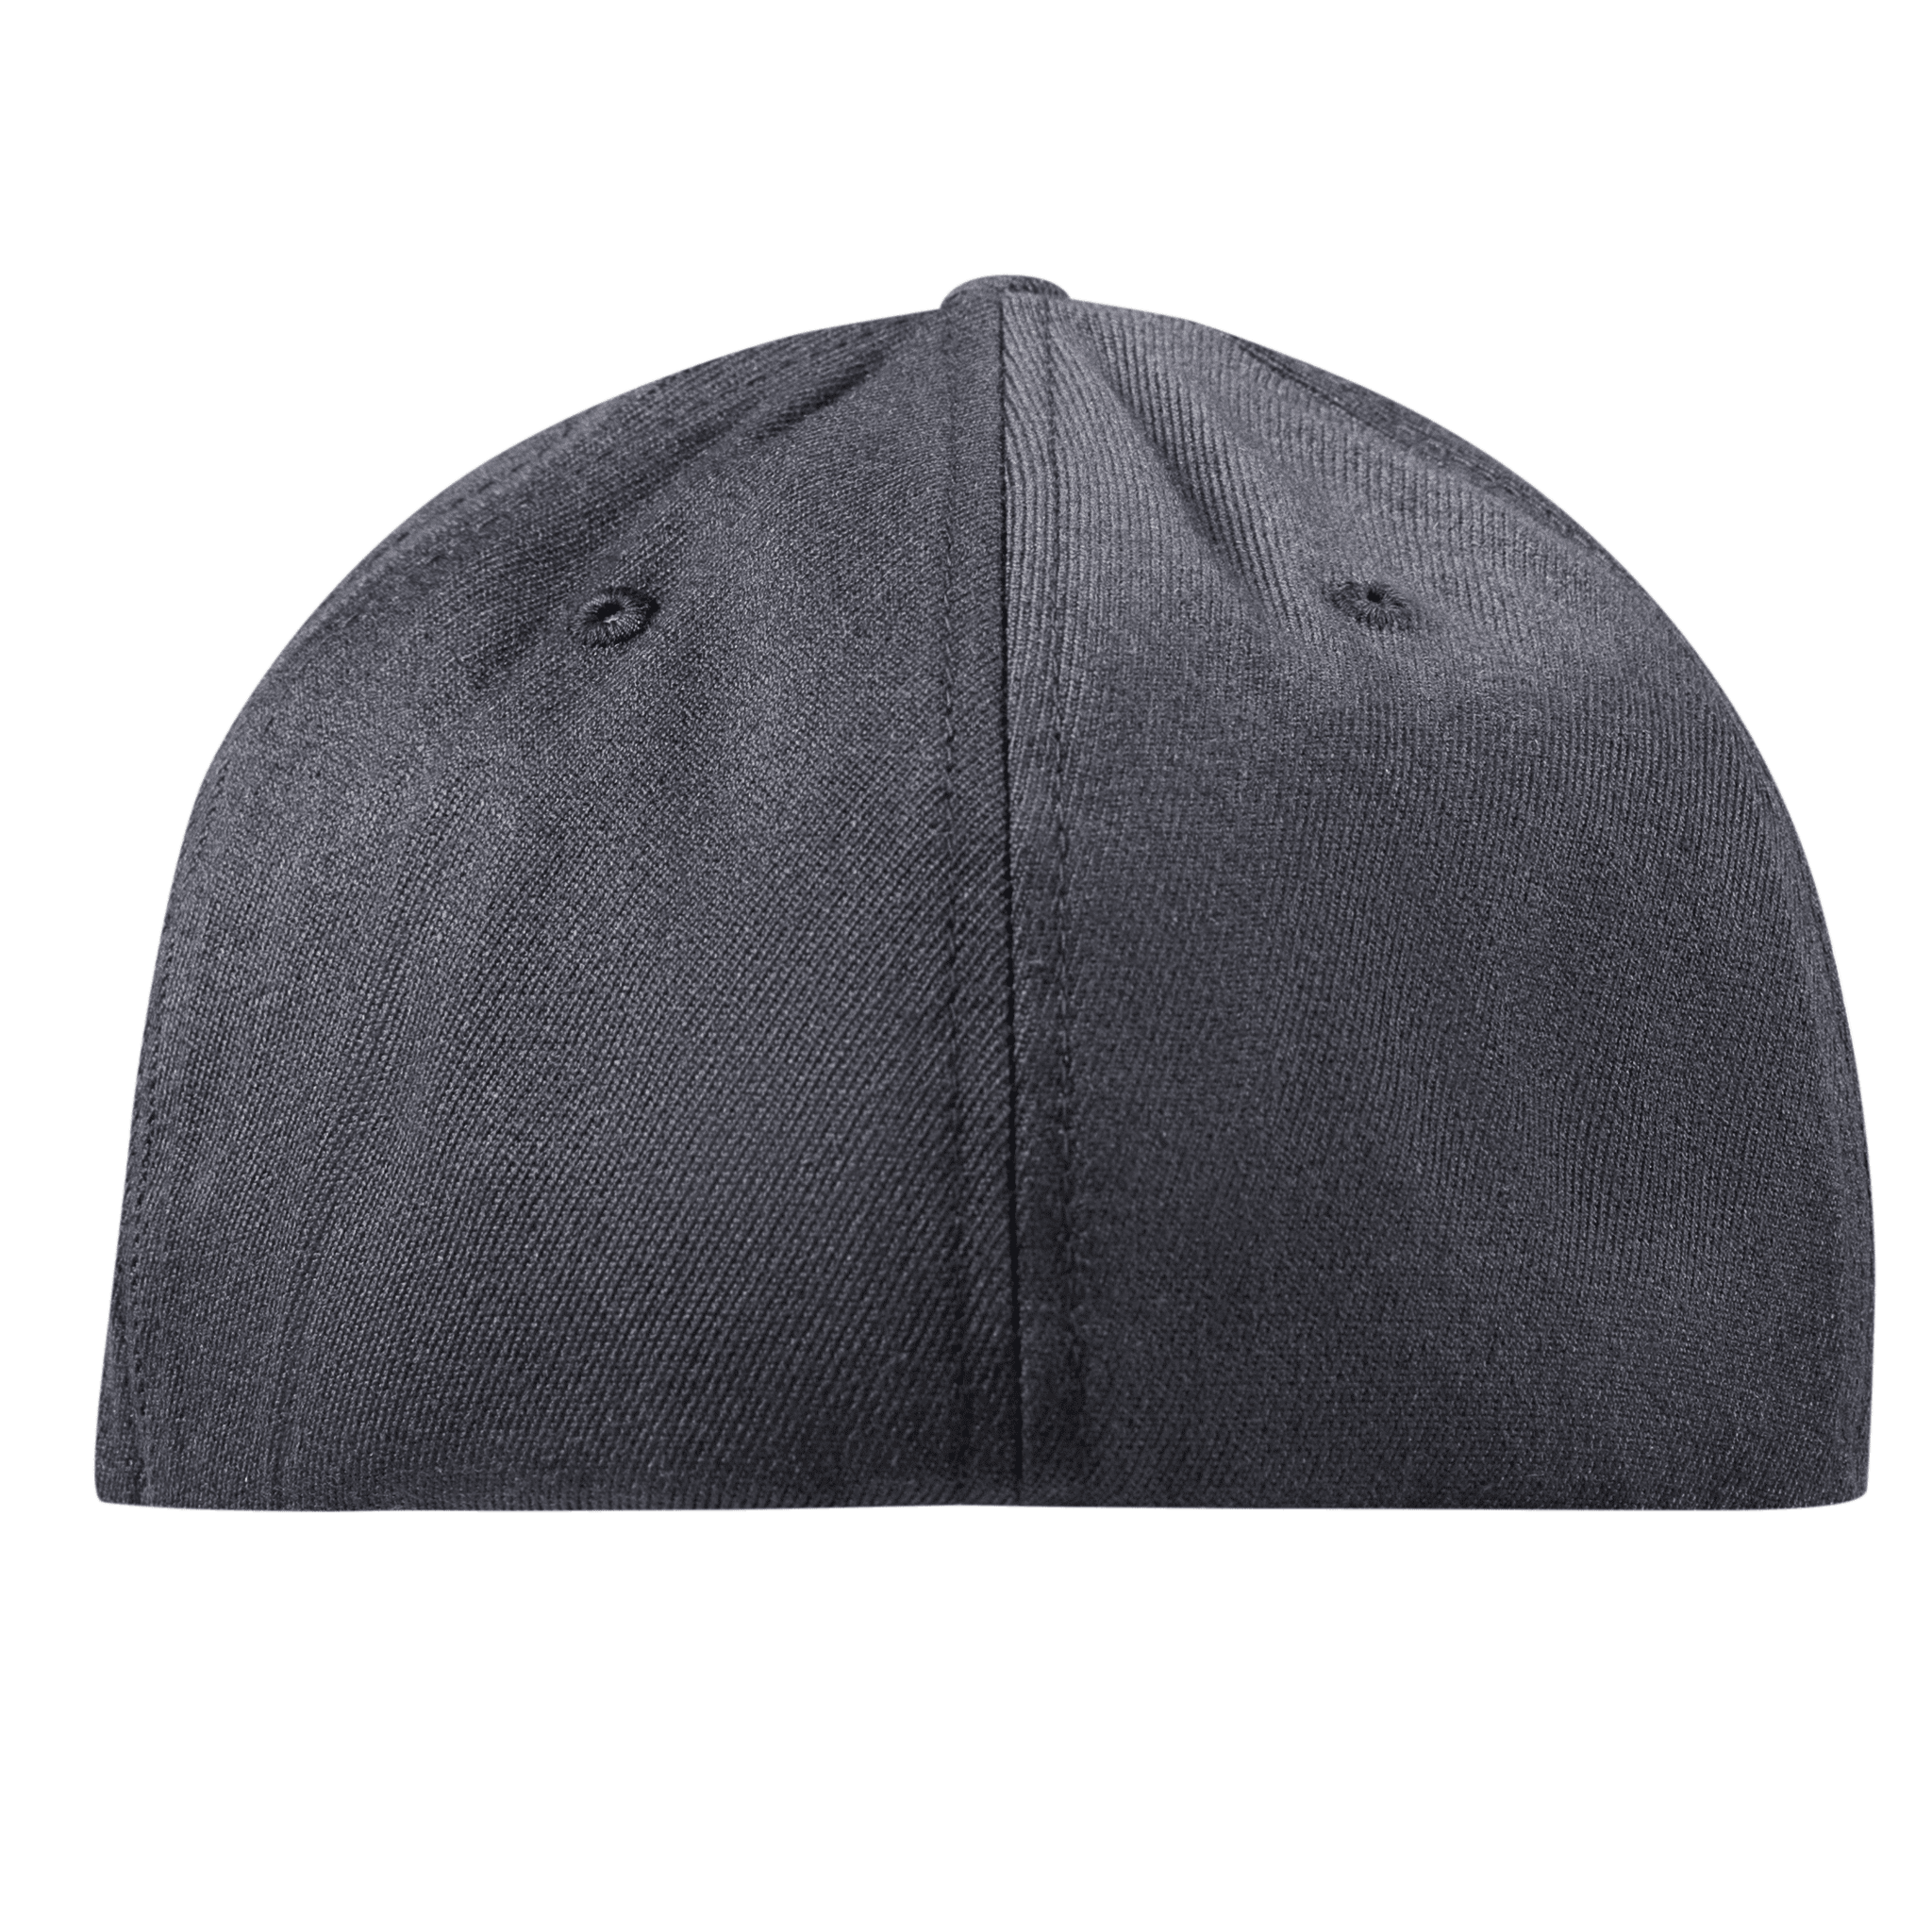 Michigan Patriot Flexfit Fitted Back Charcoal